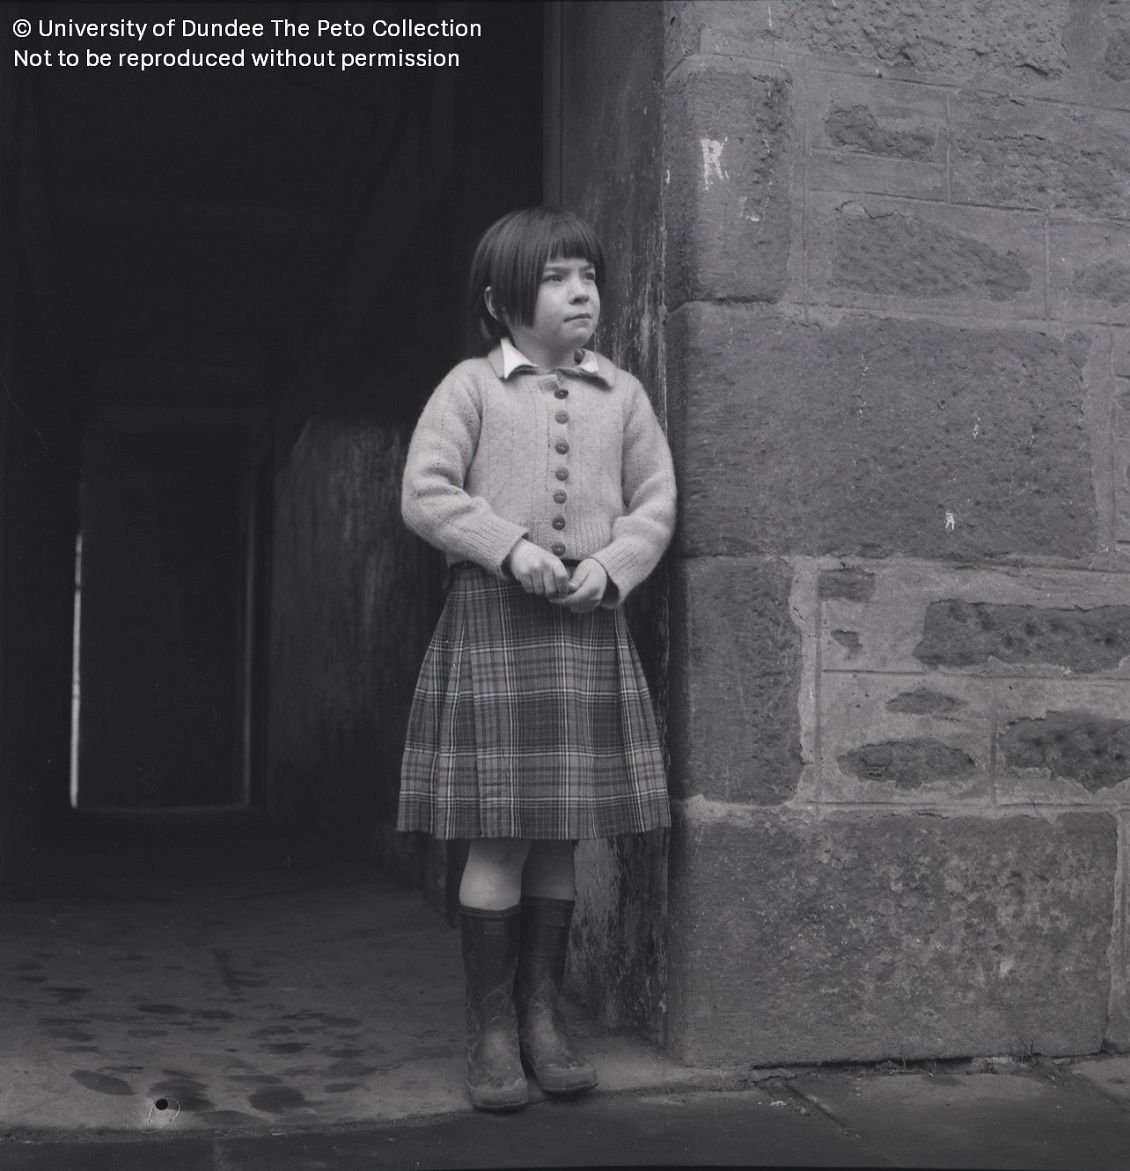 #ThrowbackThursday From The Peto Collection, a 1959 #photograph taken in #Dundee of a young girl standing at the end of a close. We are not sure of the exact location #Archives #DundeeUniCulture